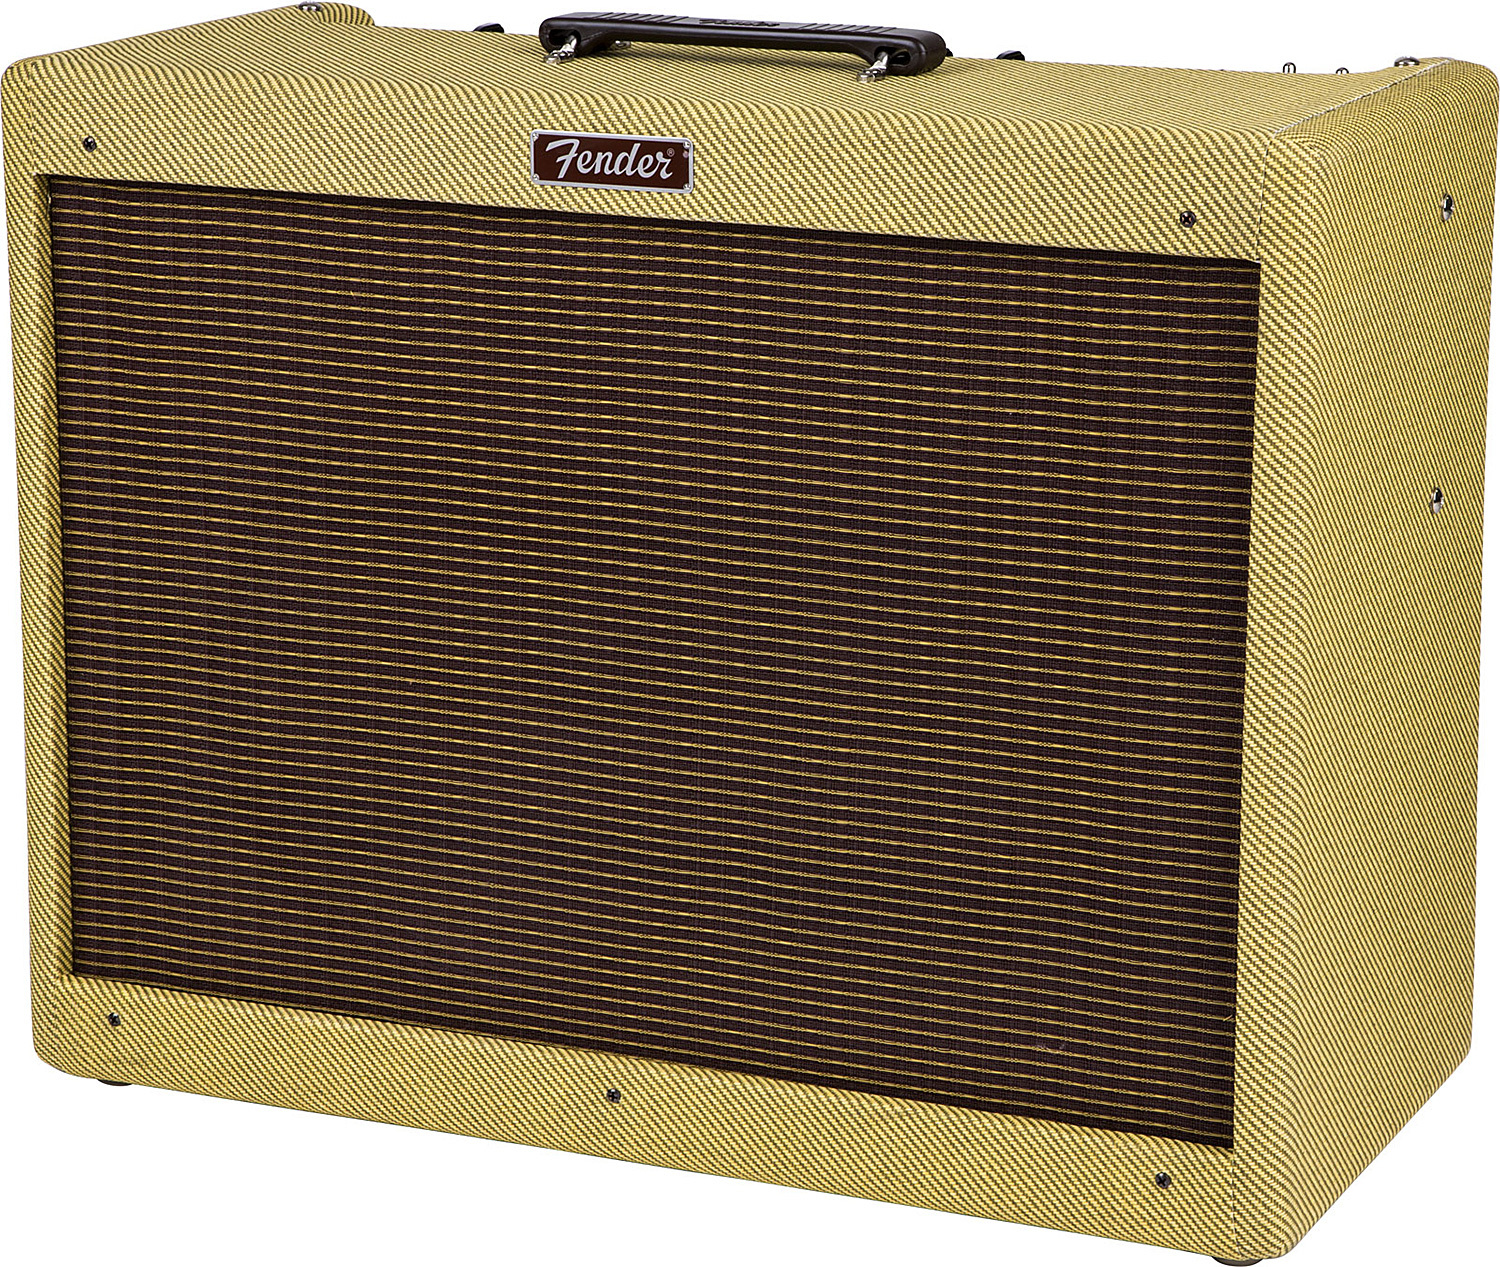 Fender Blues Deluxe Reissue 40w 1x12 Tweed - Electric guitar combo amp - Main picture